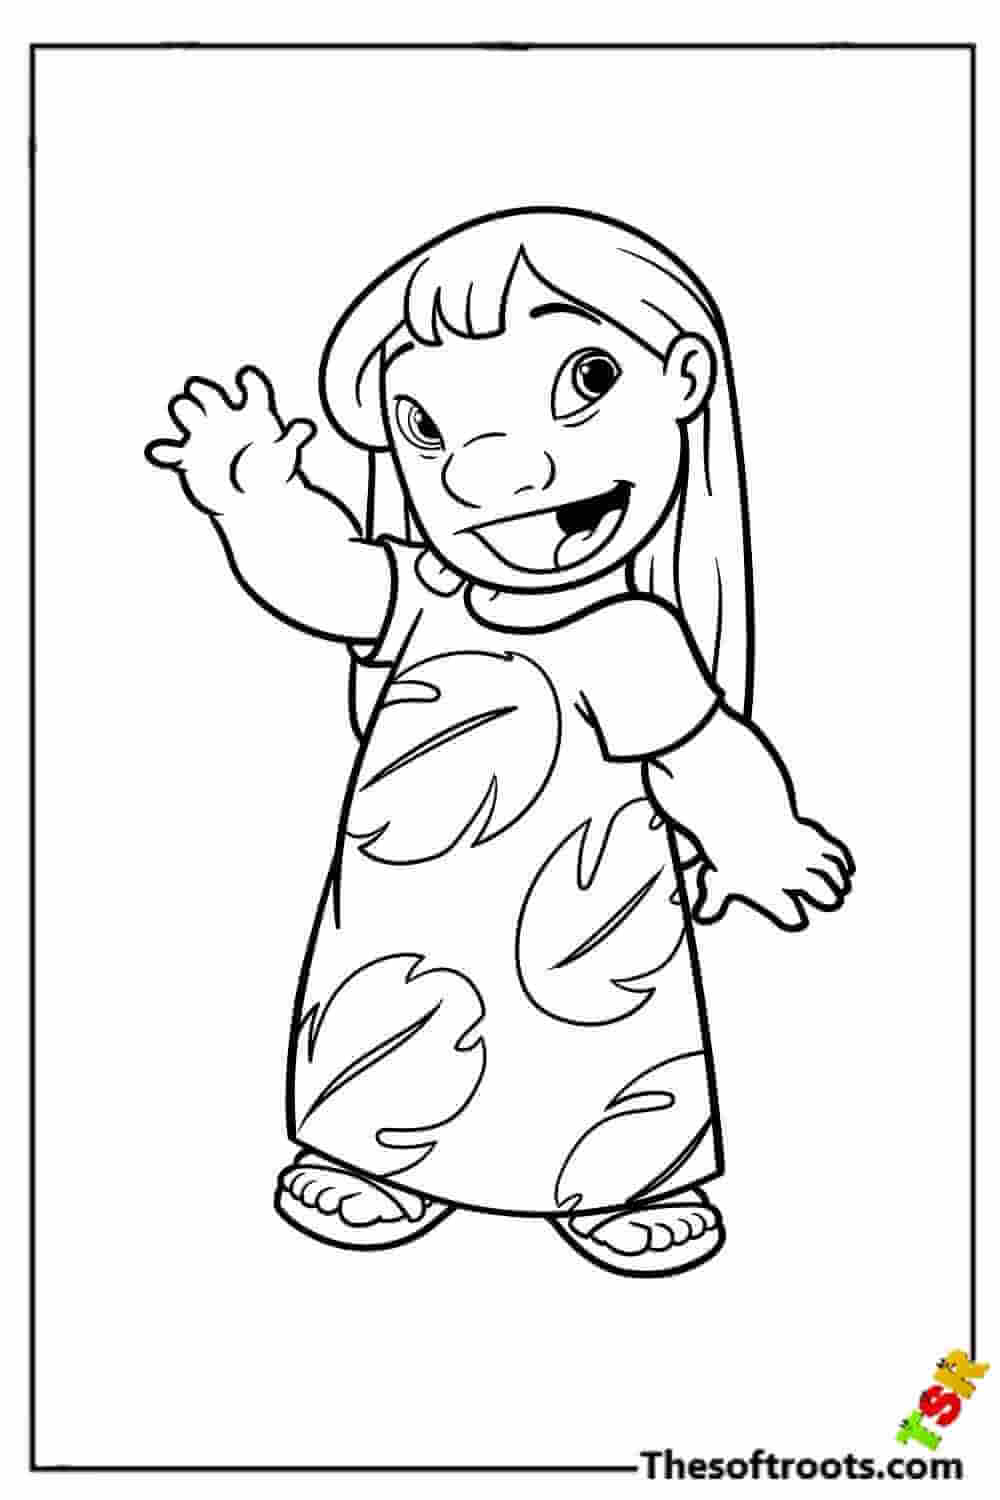 Hidden Lilo coloring pages